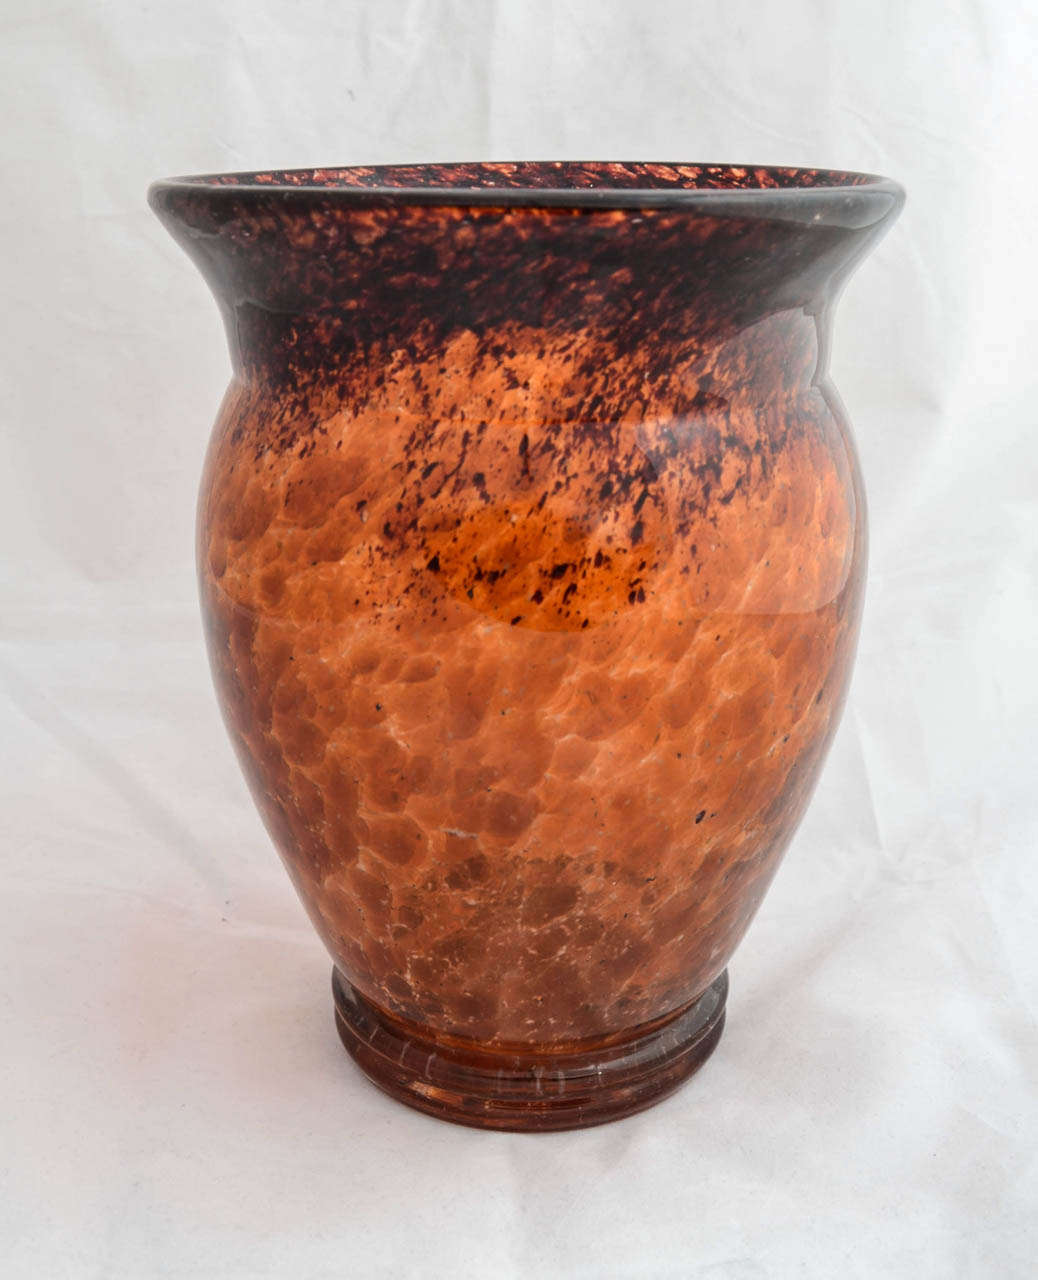 This beautiful quality hand blown vase could be confused with Monart from Scotland, with it's mottled, almost tortoiseshell-like finish with white inclusions and black streaks towards the flared rim. But the shape, with a double foot and rim flared